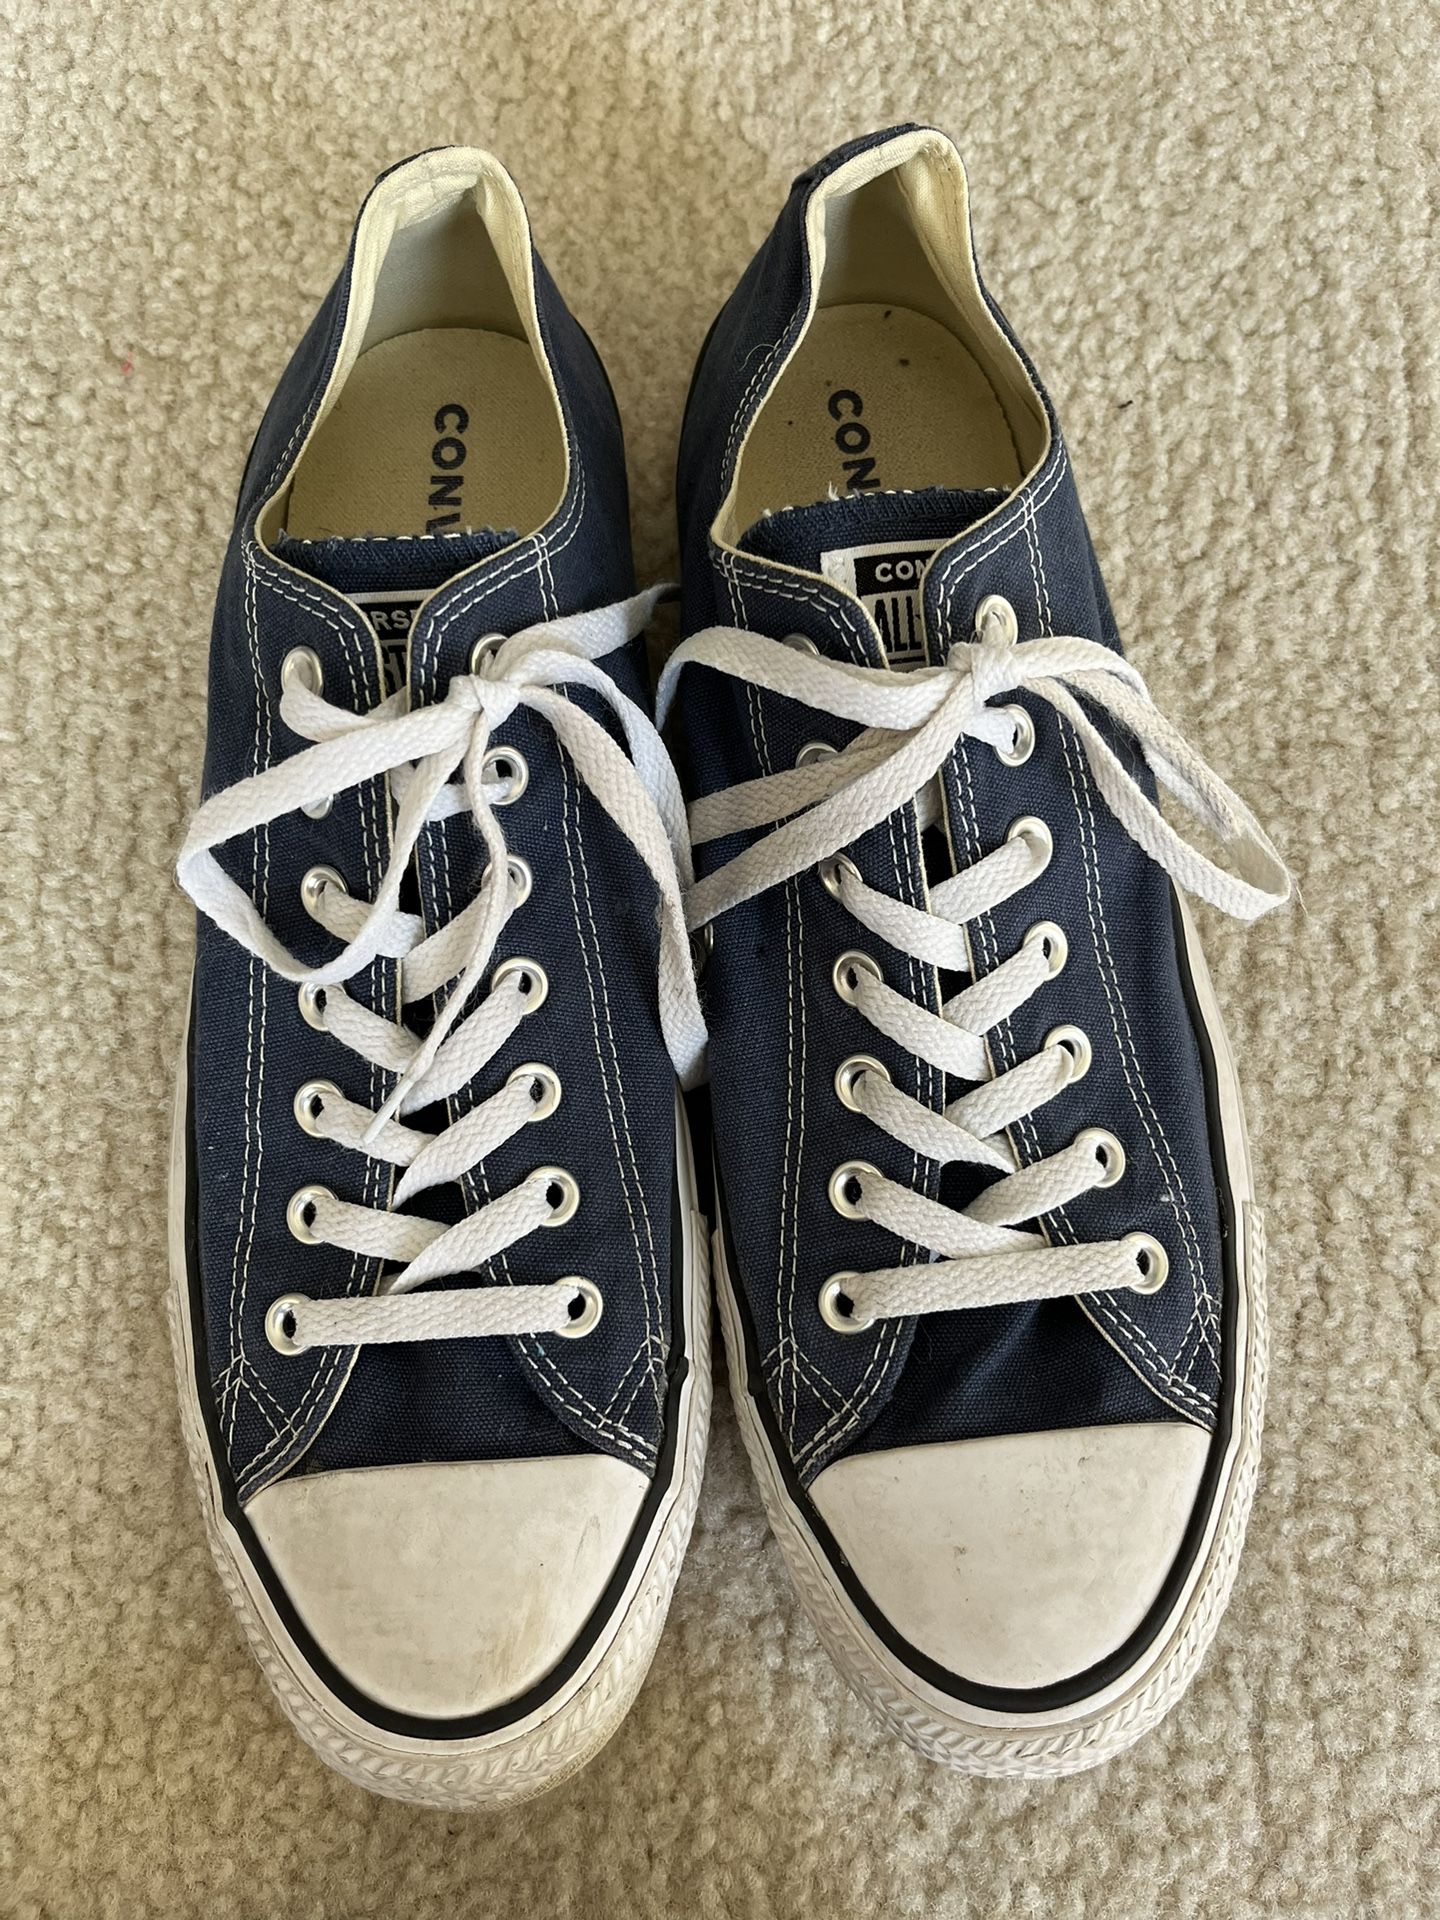 Men’s size 11.5 or women’s 13.5 Converse All Star shoes 